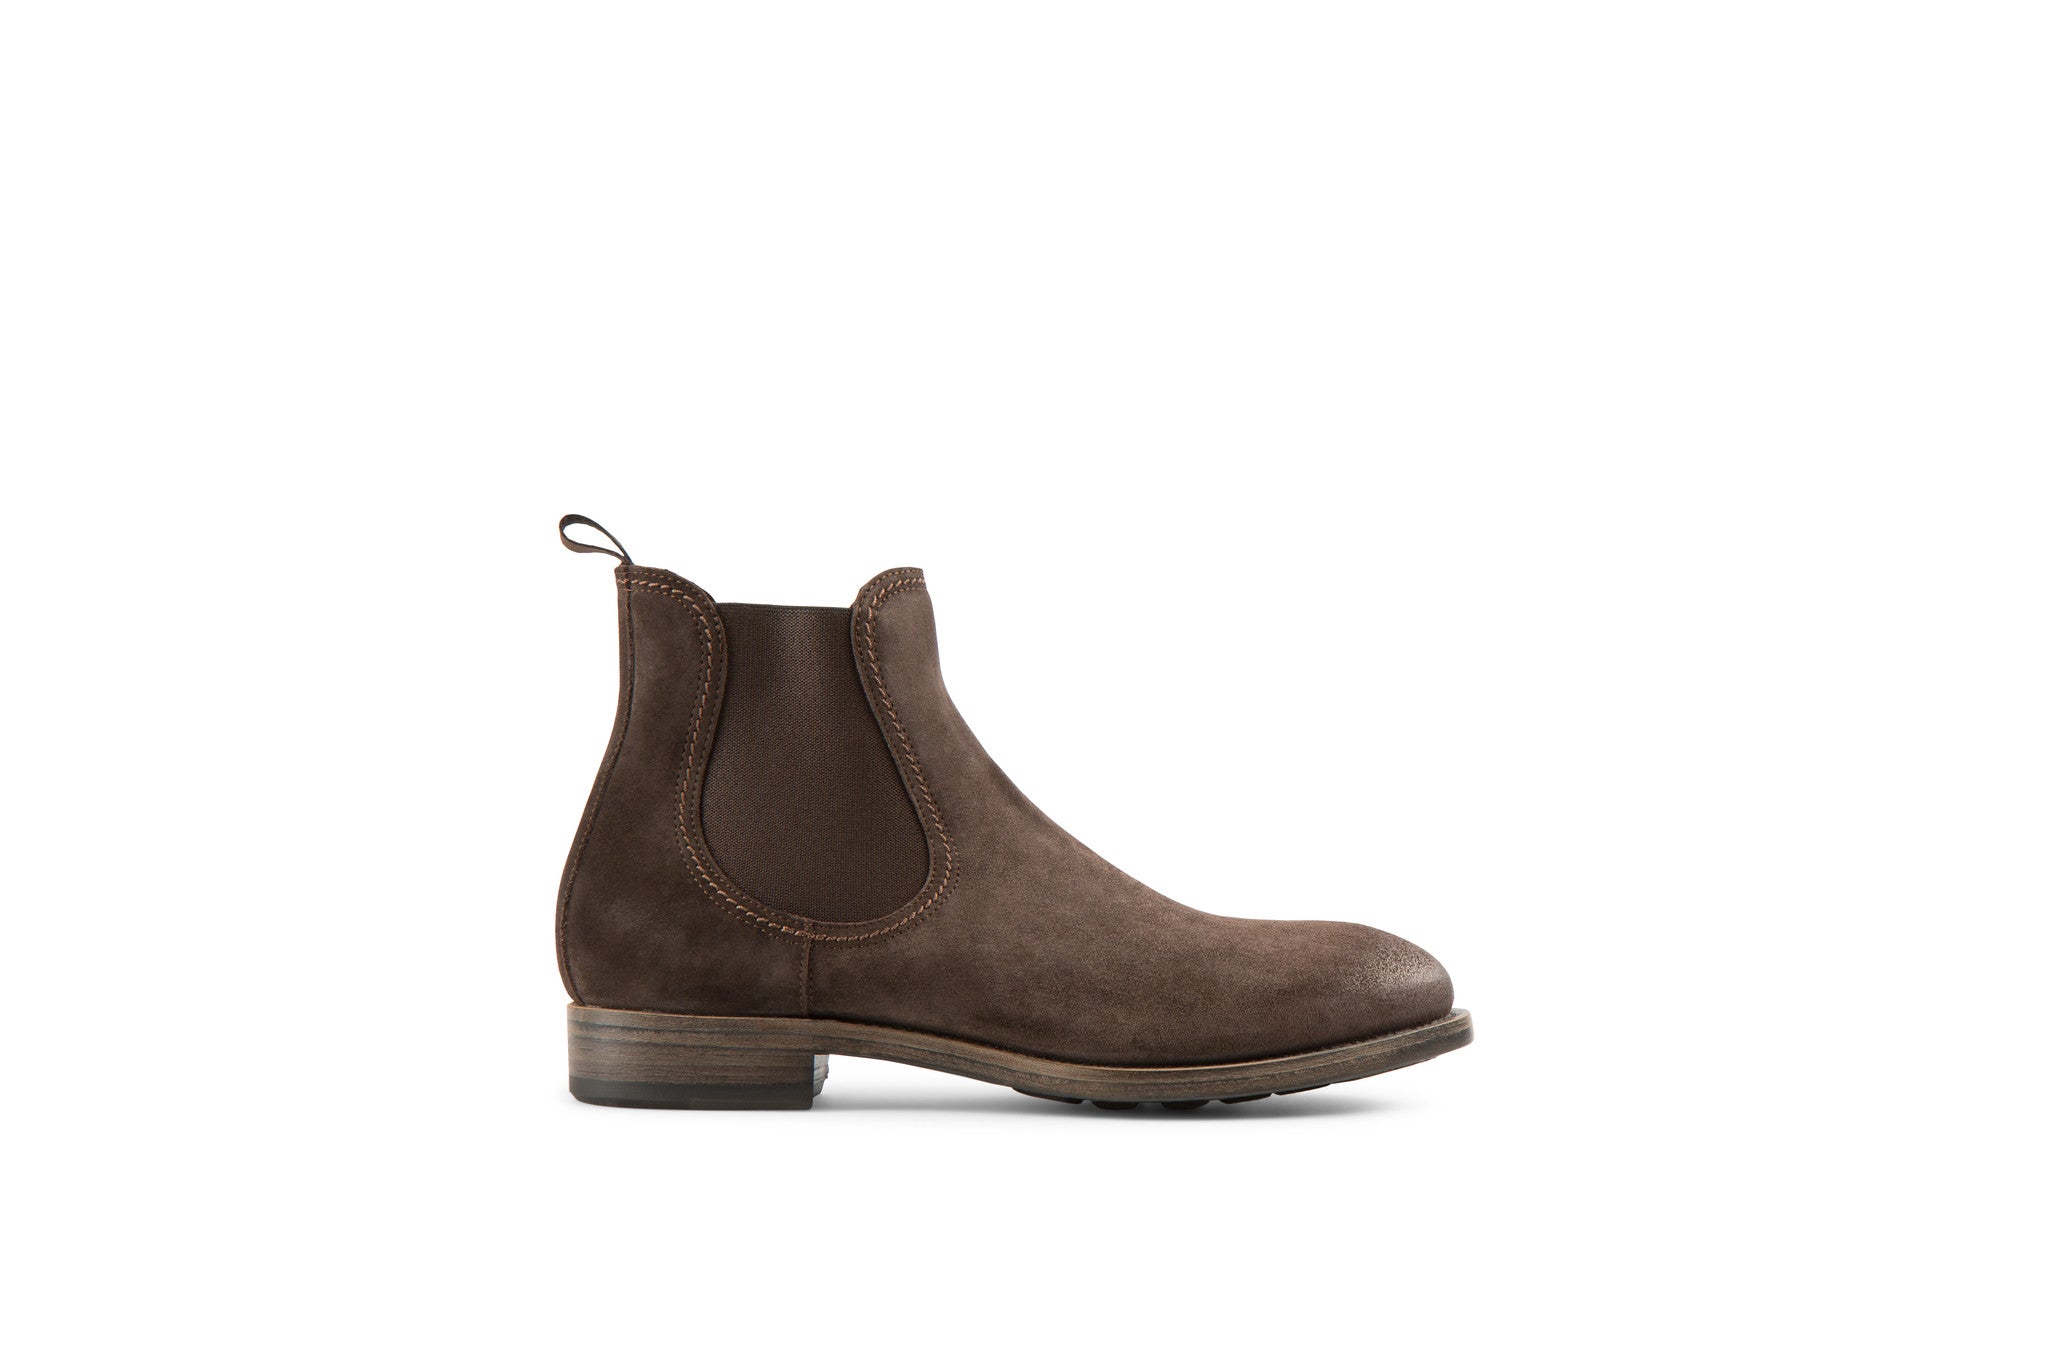 Hanoi Coffee Suede Leather Chelsea Boots